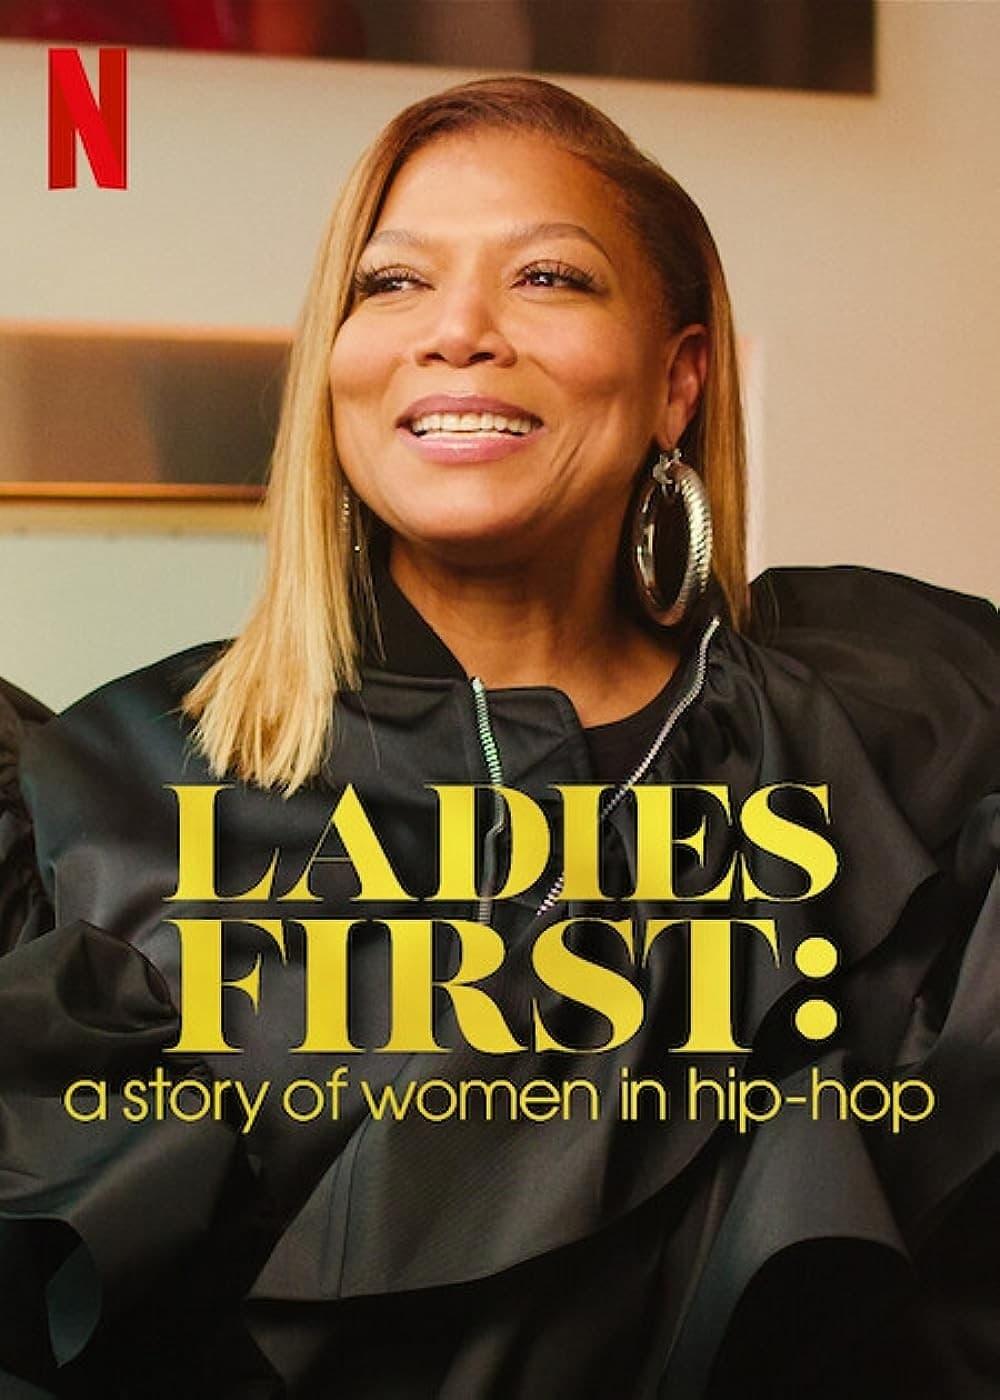 Ladies First: A Story of Women in Hip-Hop poster